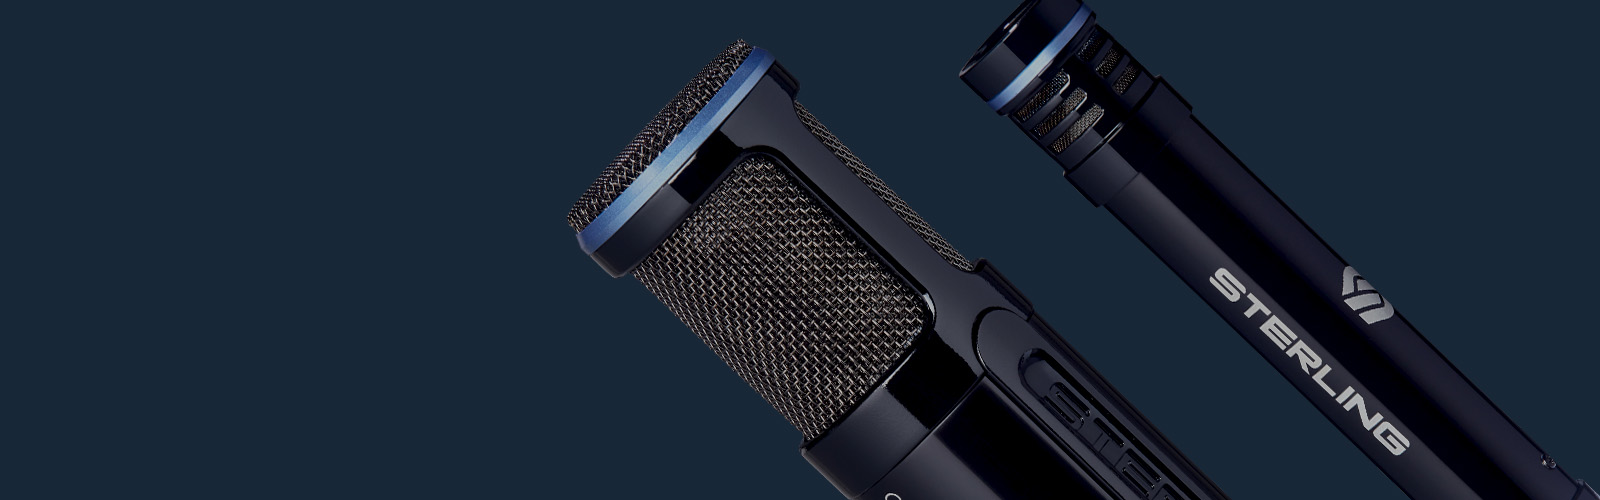 Sterling SP150/130 studio condenser microphone pack on blue background close up.